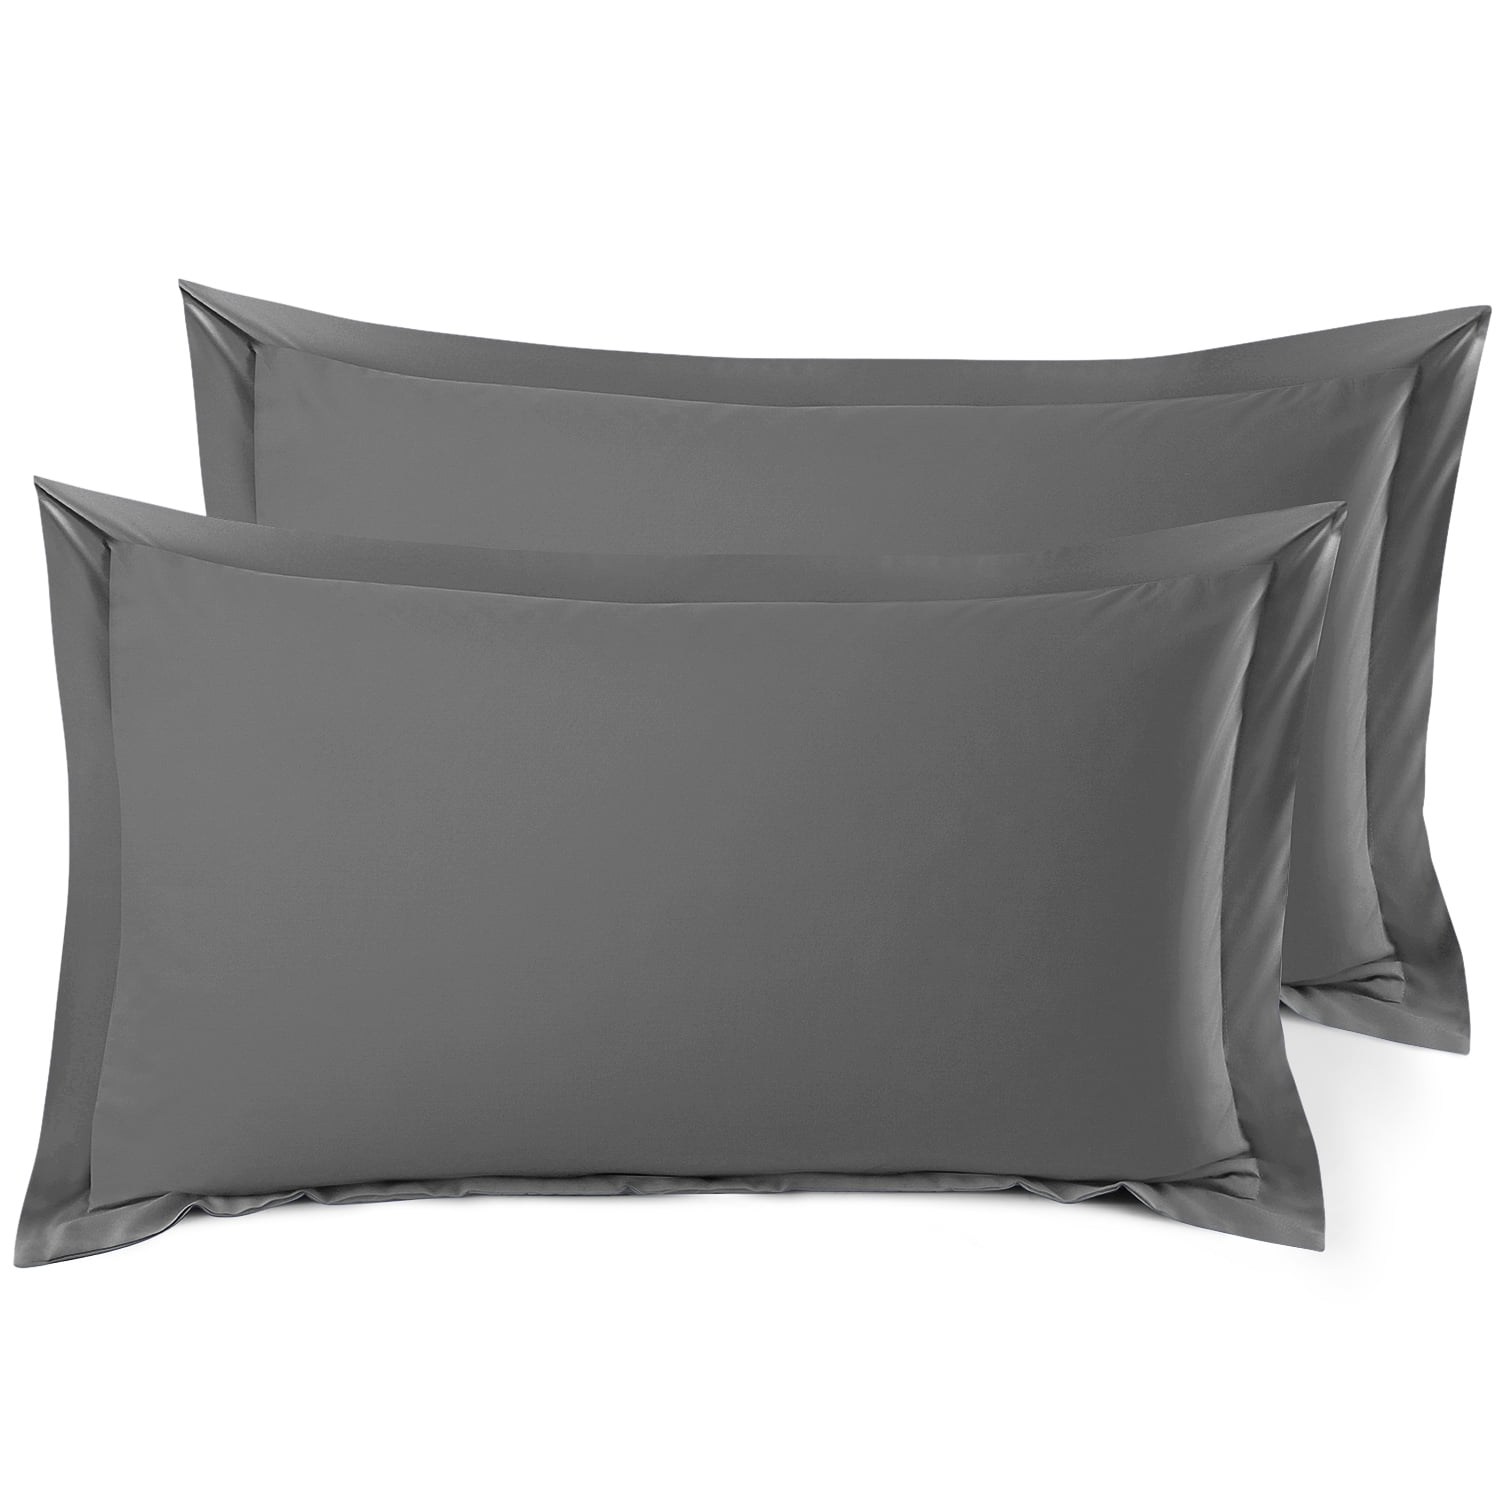 Size Pillow Shams Charcoal Gray, King Size Bed With Euro Shams